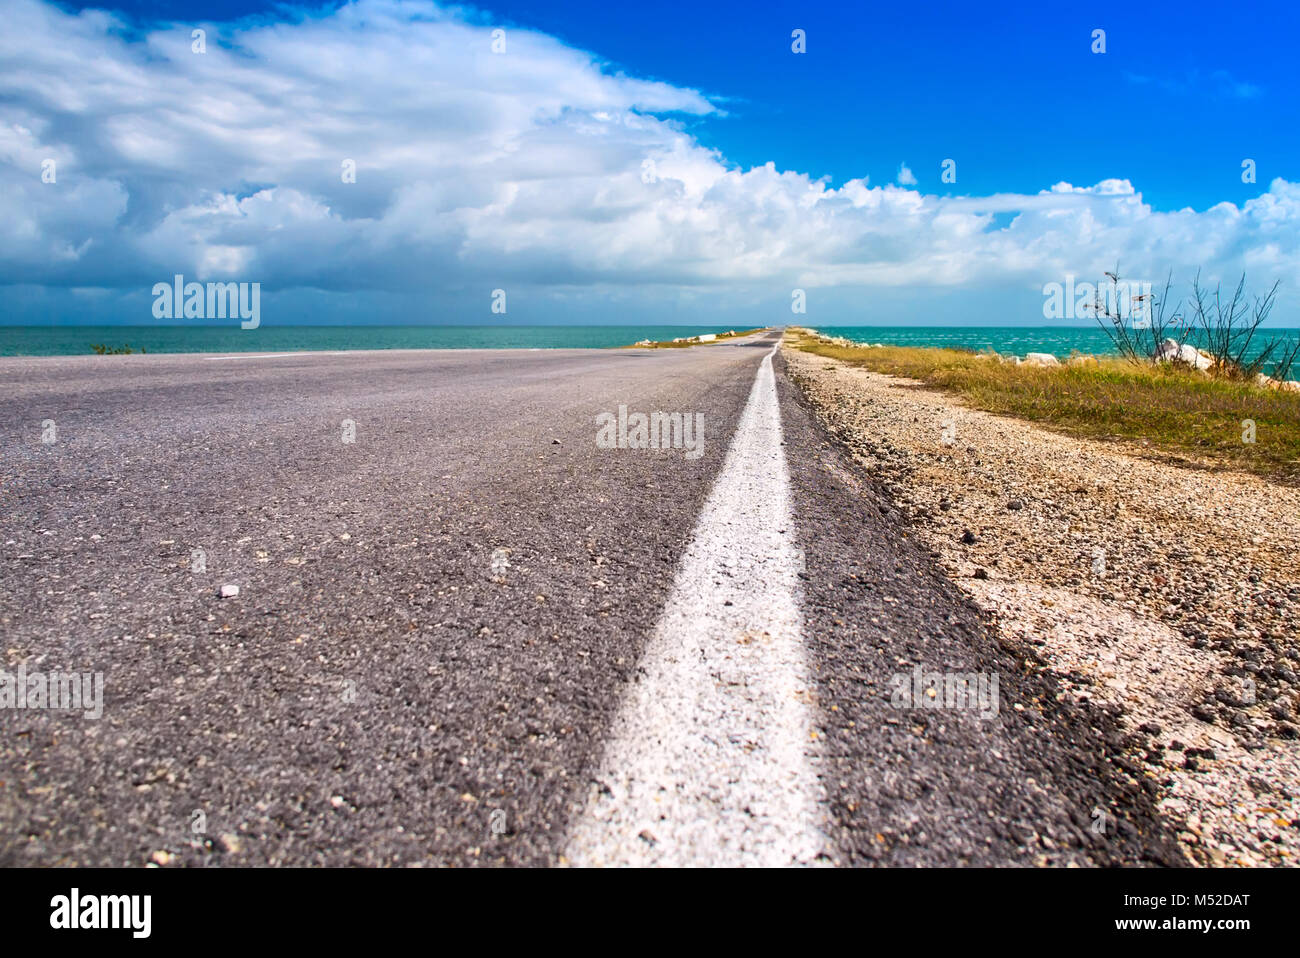 Road highway route leaving in ocean bulk man-made artificial dam from island of Cuba to Cayo Guillermo Atlantic Ocean Latin America Stock Photo